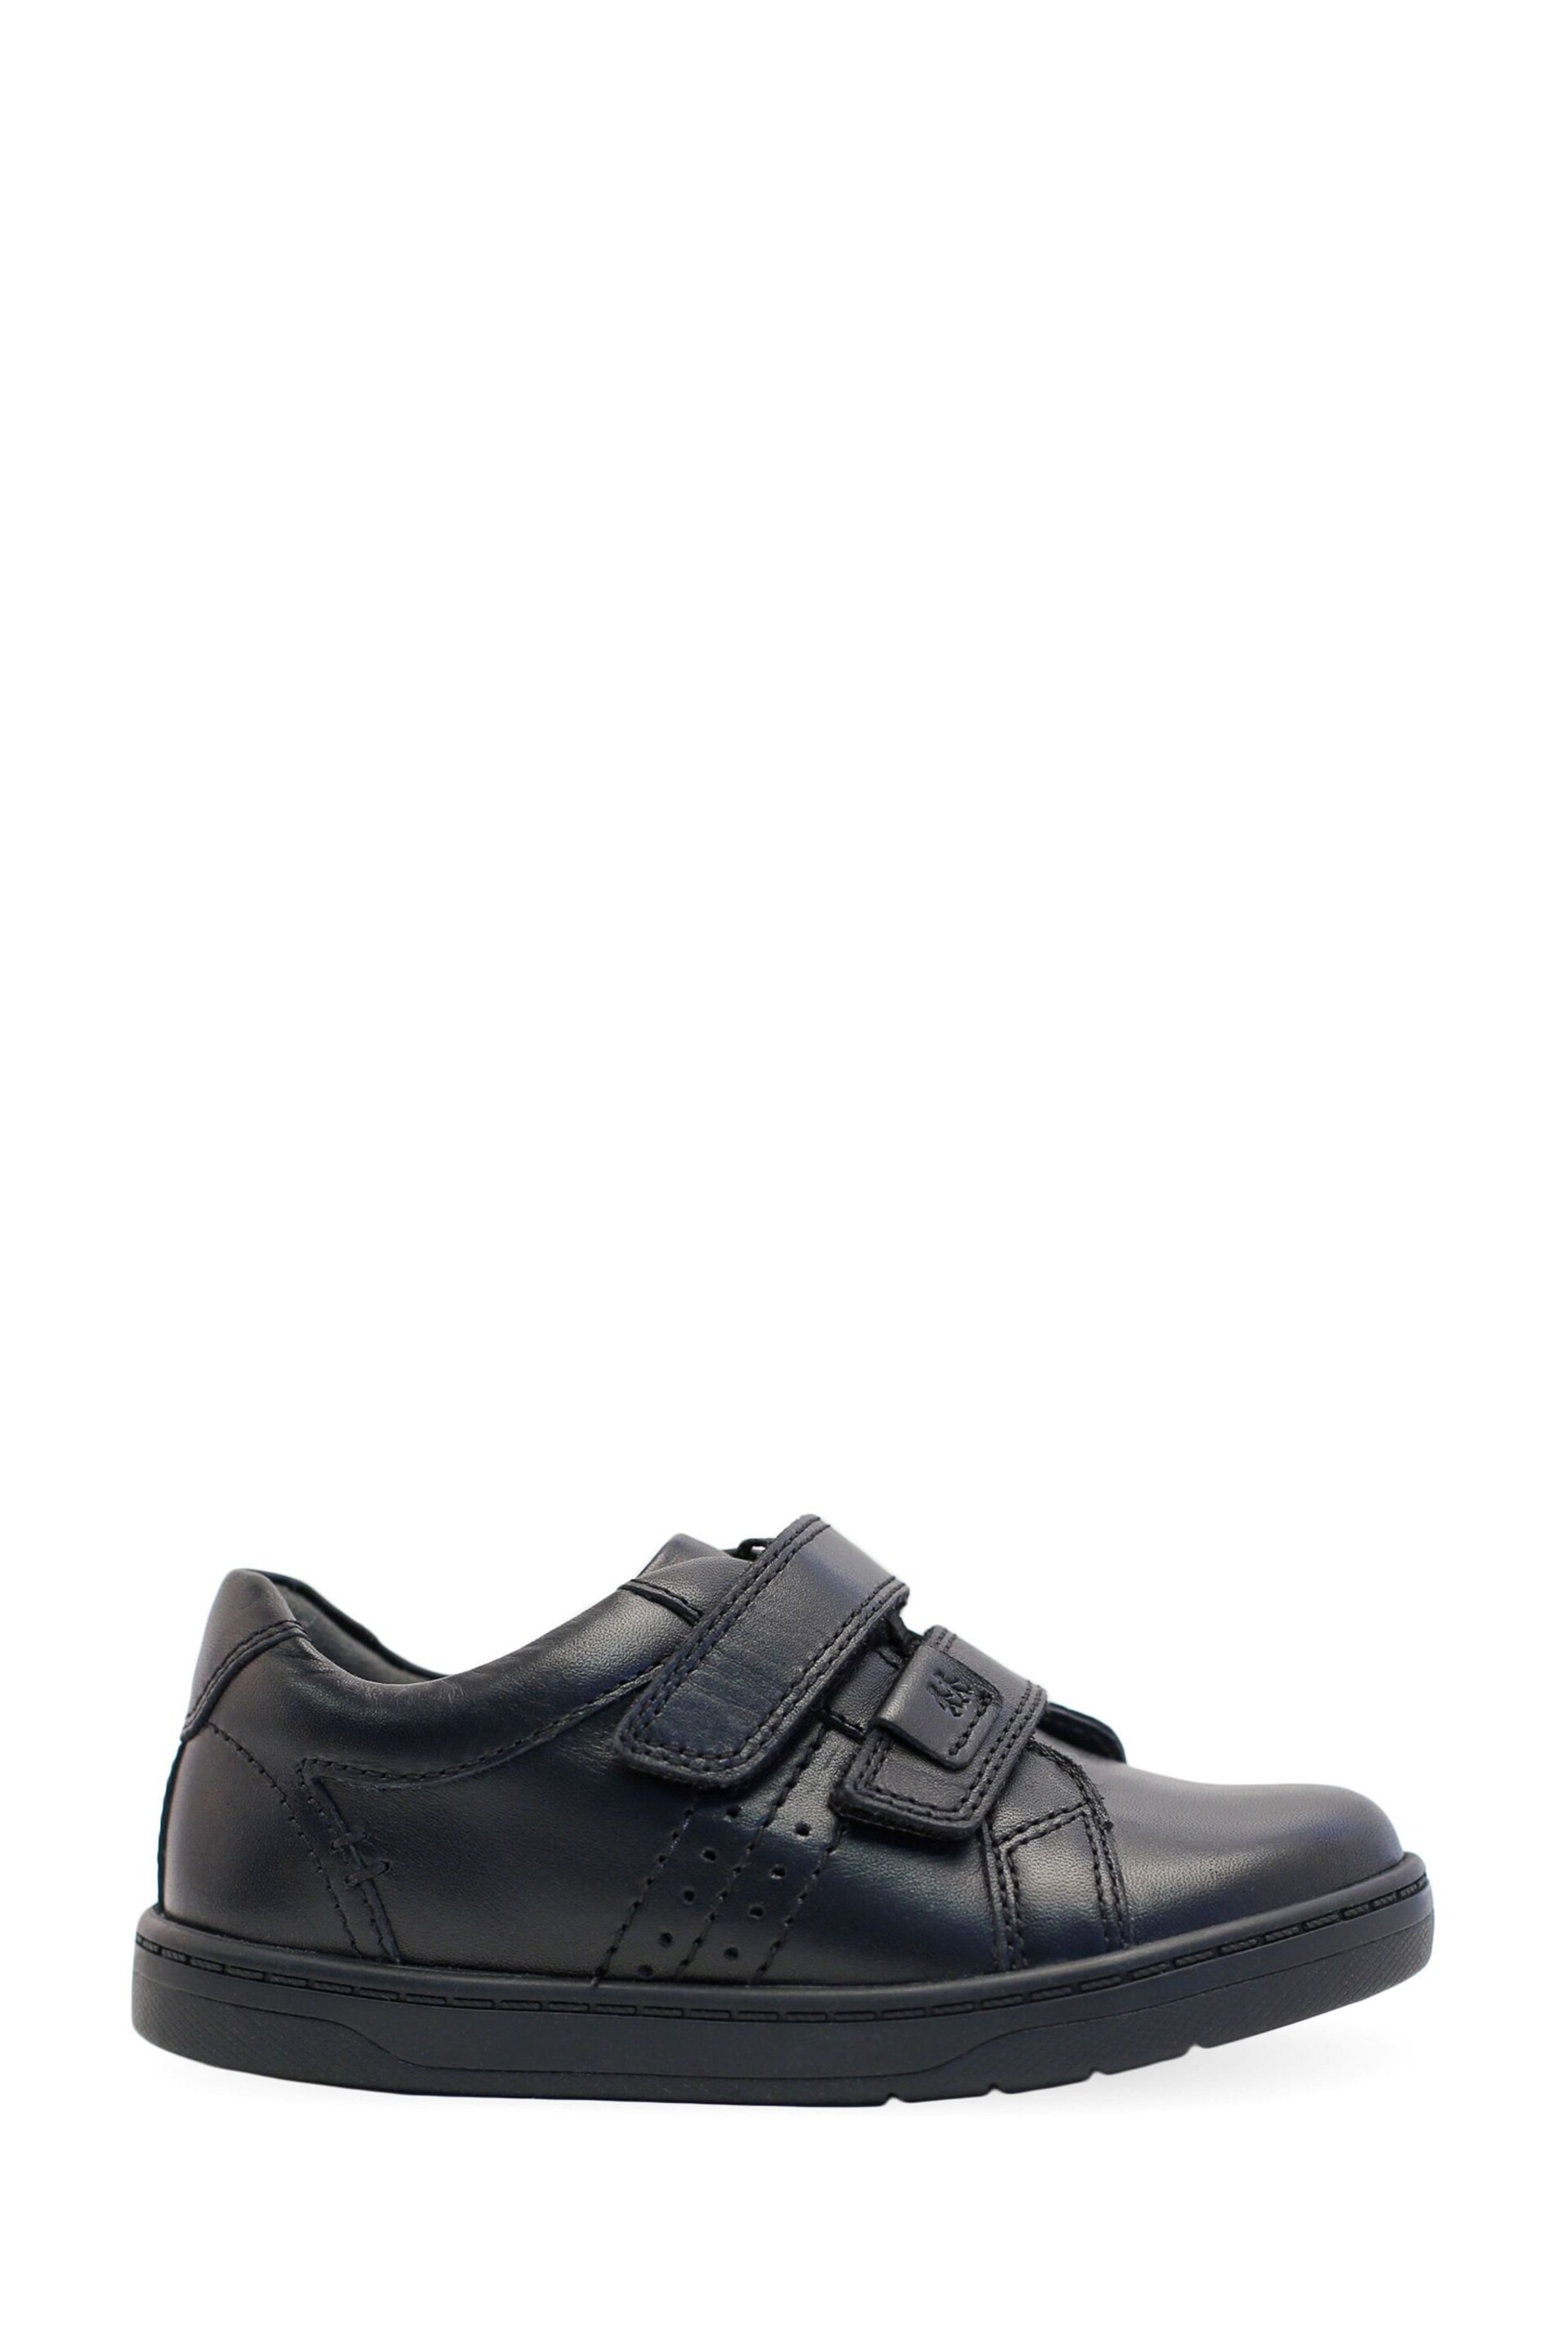 Start-Rite Explore Rip-Tape Black Leather Comfy School Shoes F Fit - Image 1 of 7